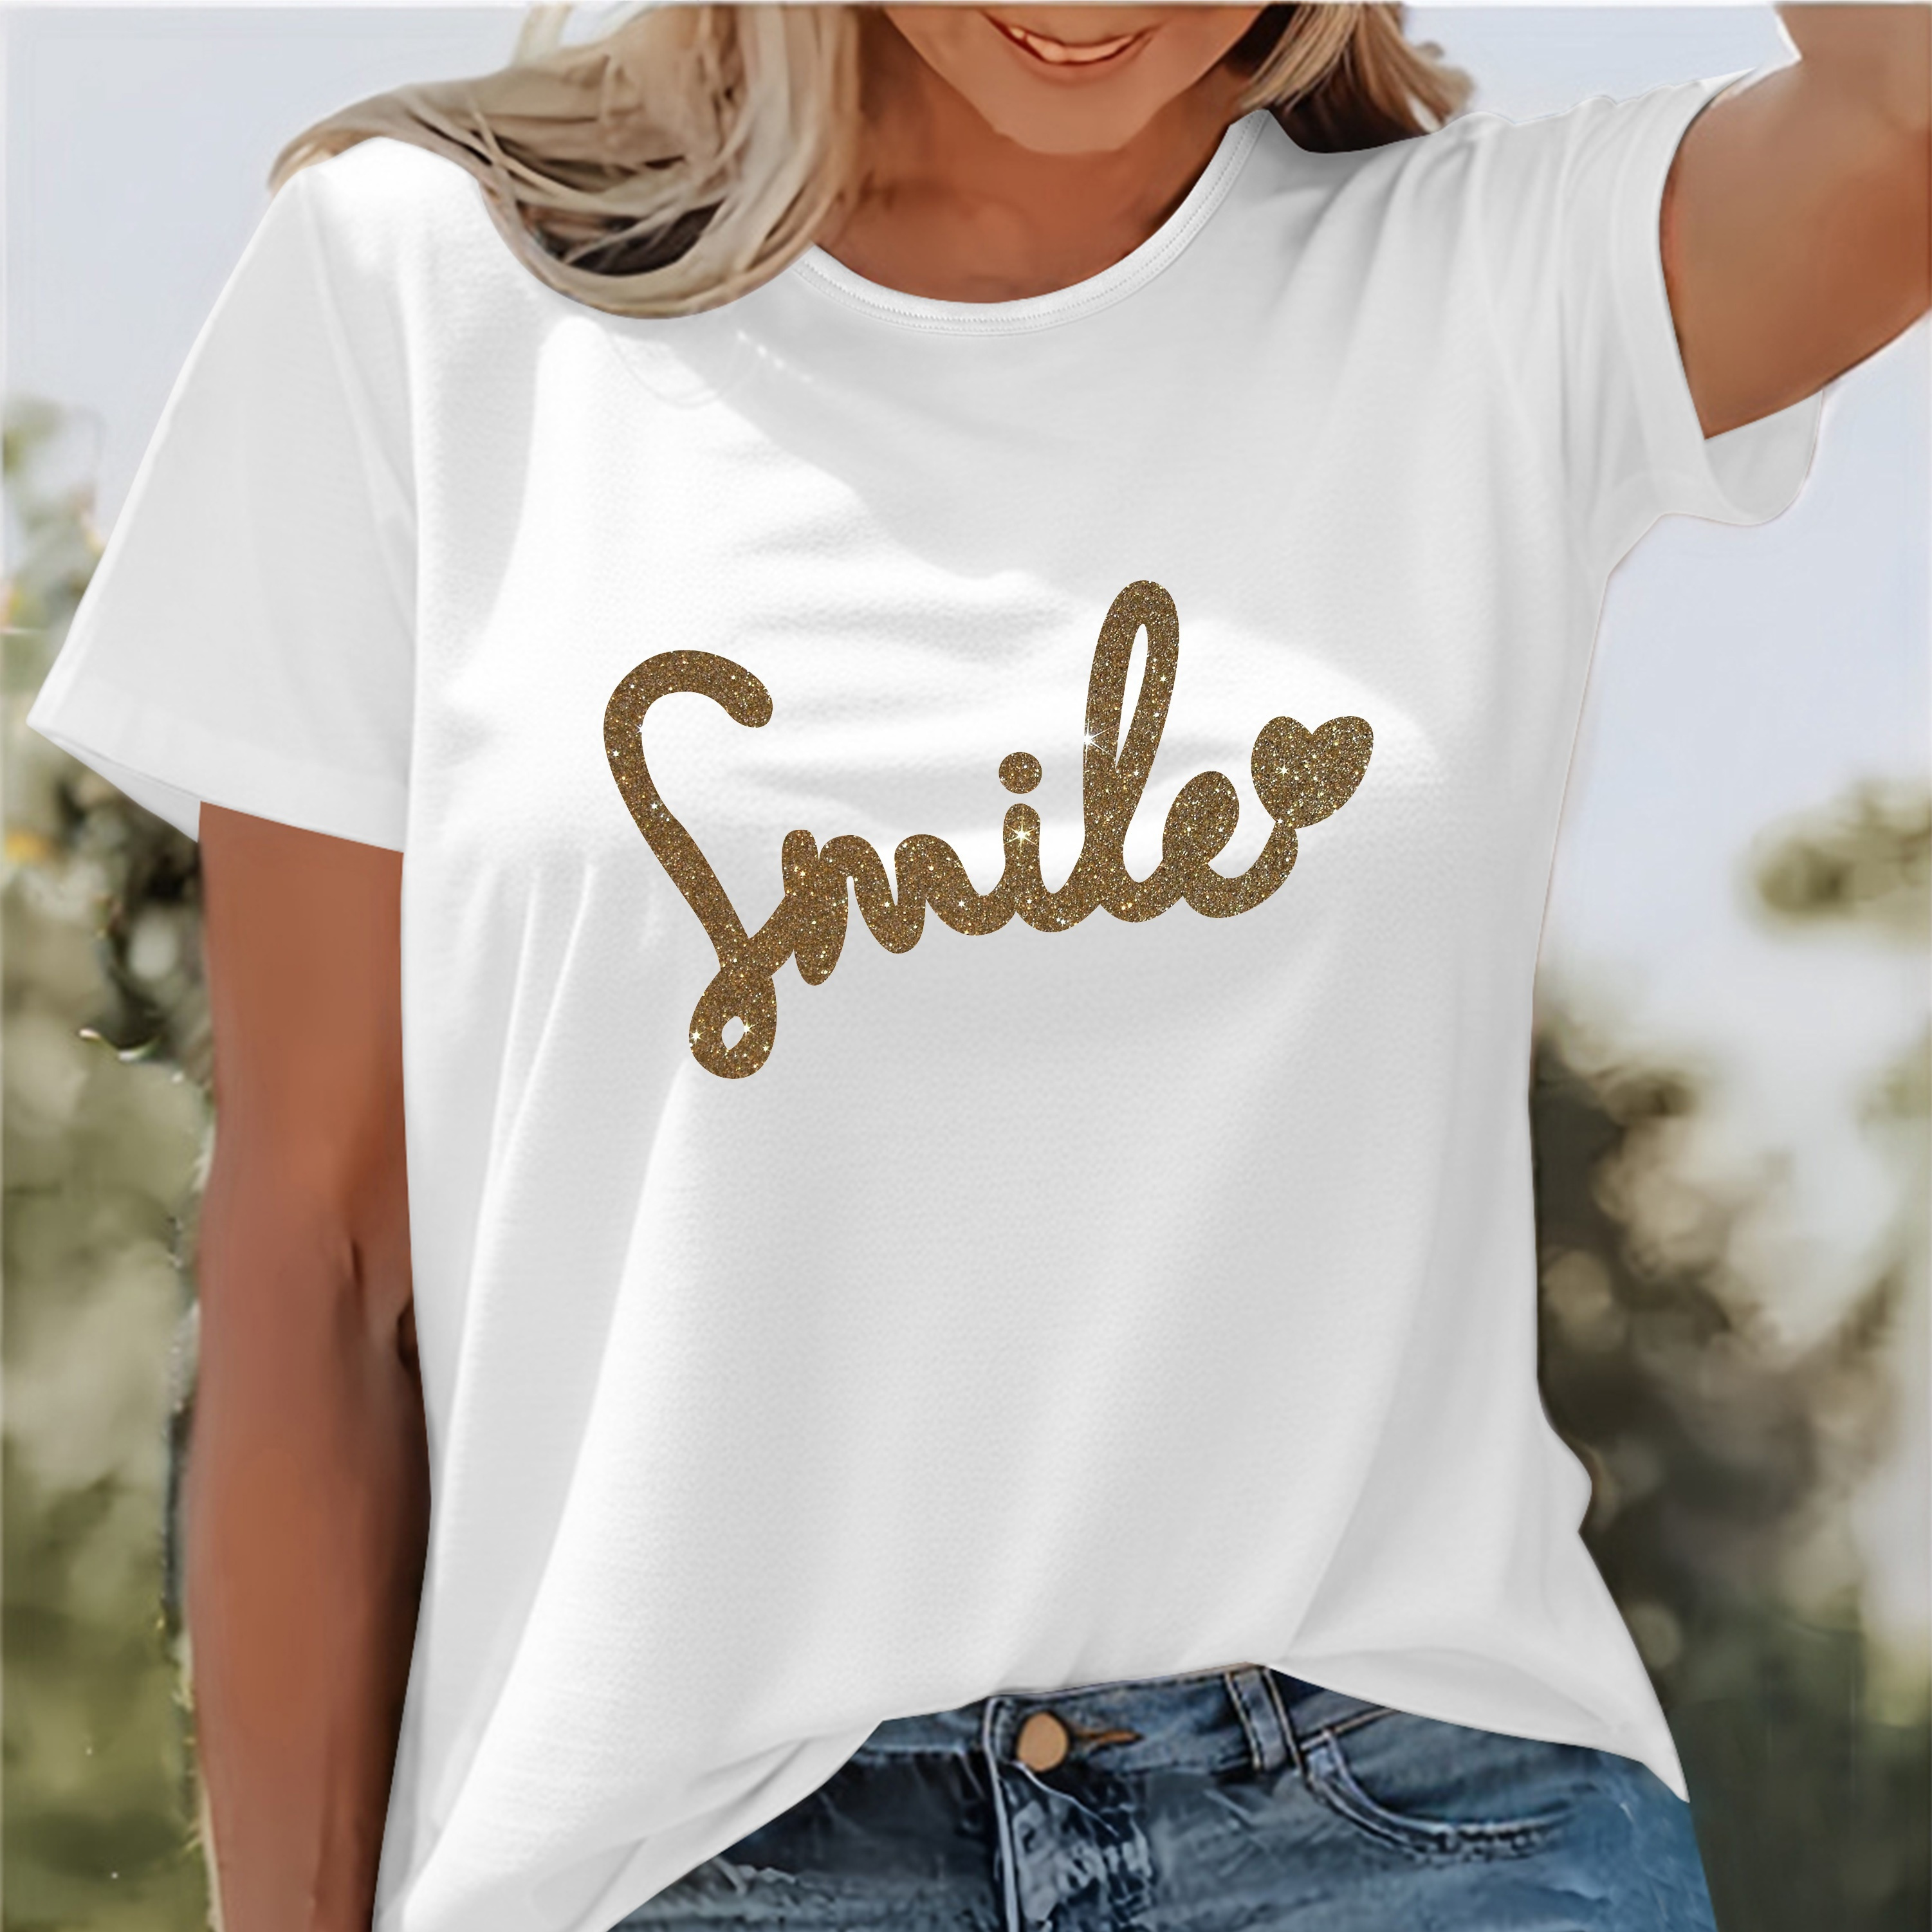 

Smile Print T-shirt, Short Sleeve Crew Neck Casual Top For Summer & Spring, Women's Clothing